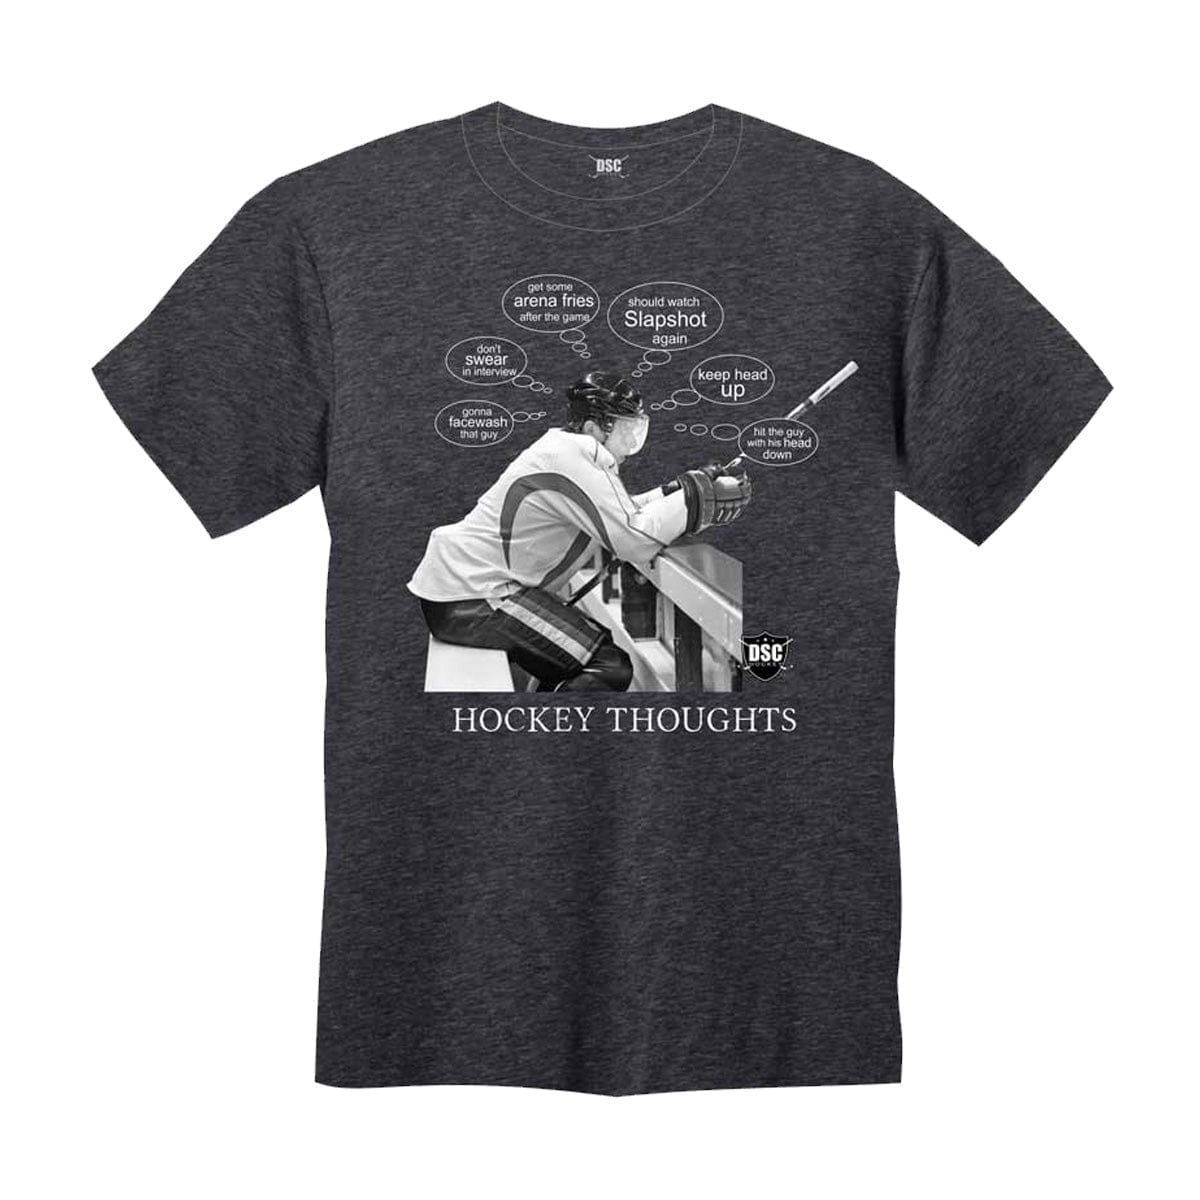 DSC Hockey Thoughts Mens Shirt - The Hockey Shop Source For Sports